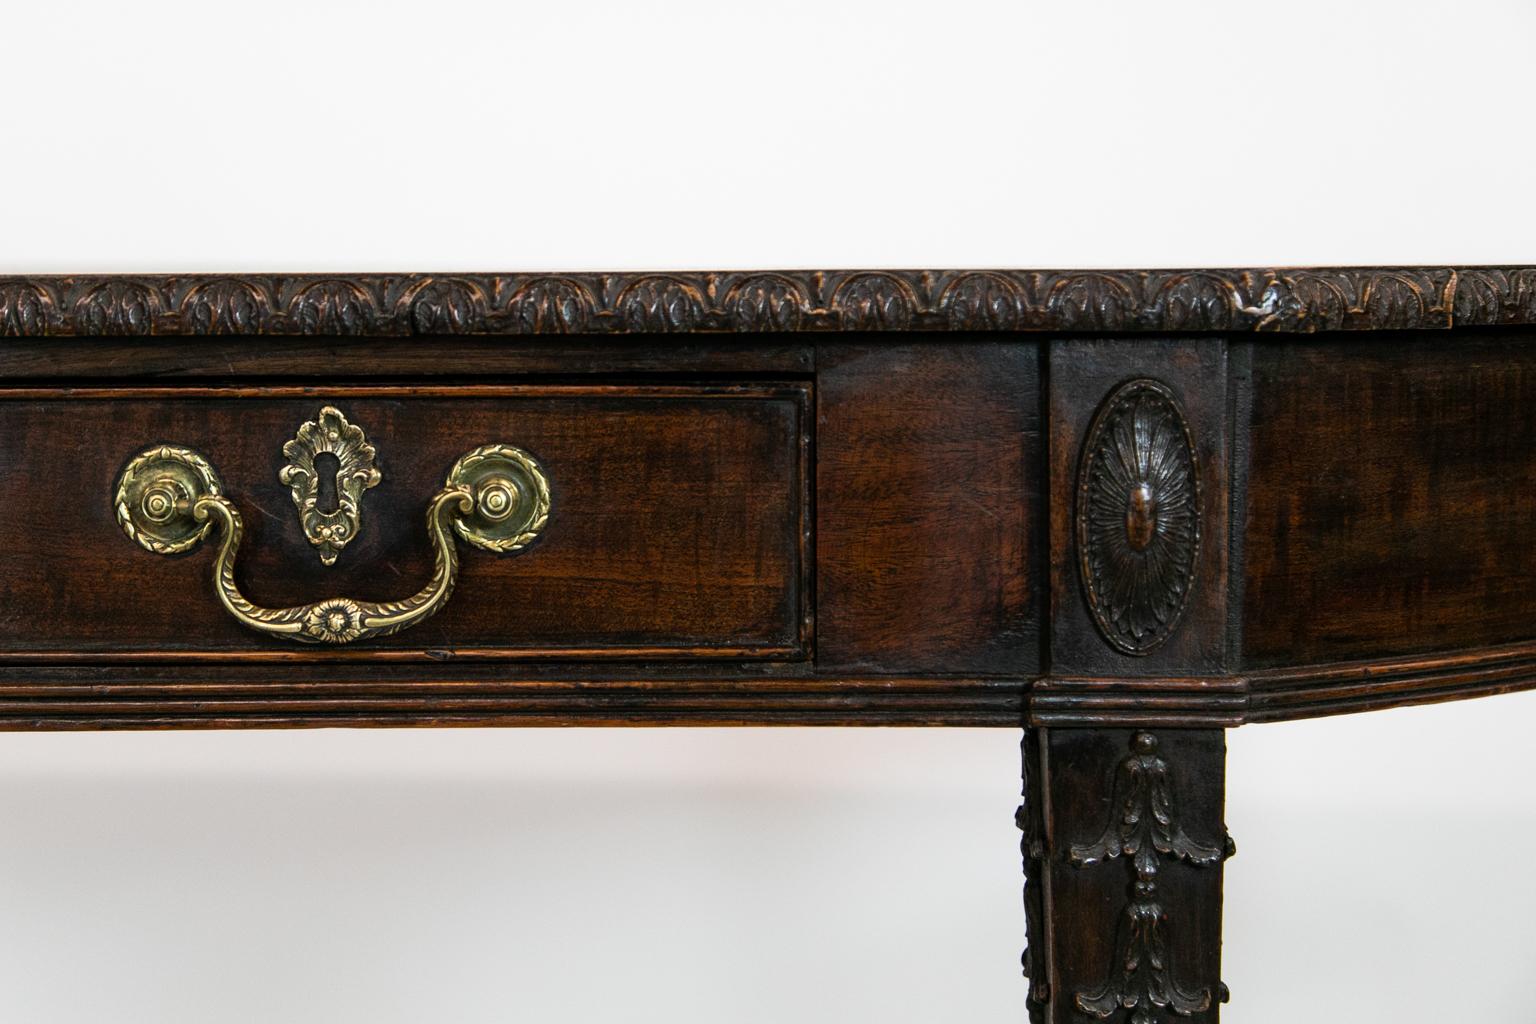 This carved mahogany console table has a straight front with rounded ends. The top edge has applied carved molding with a stylized leaf motif. The top of the legs have oval medallions with applied bellflowers below. The apron has reeded molding that